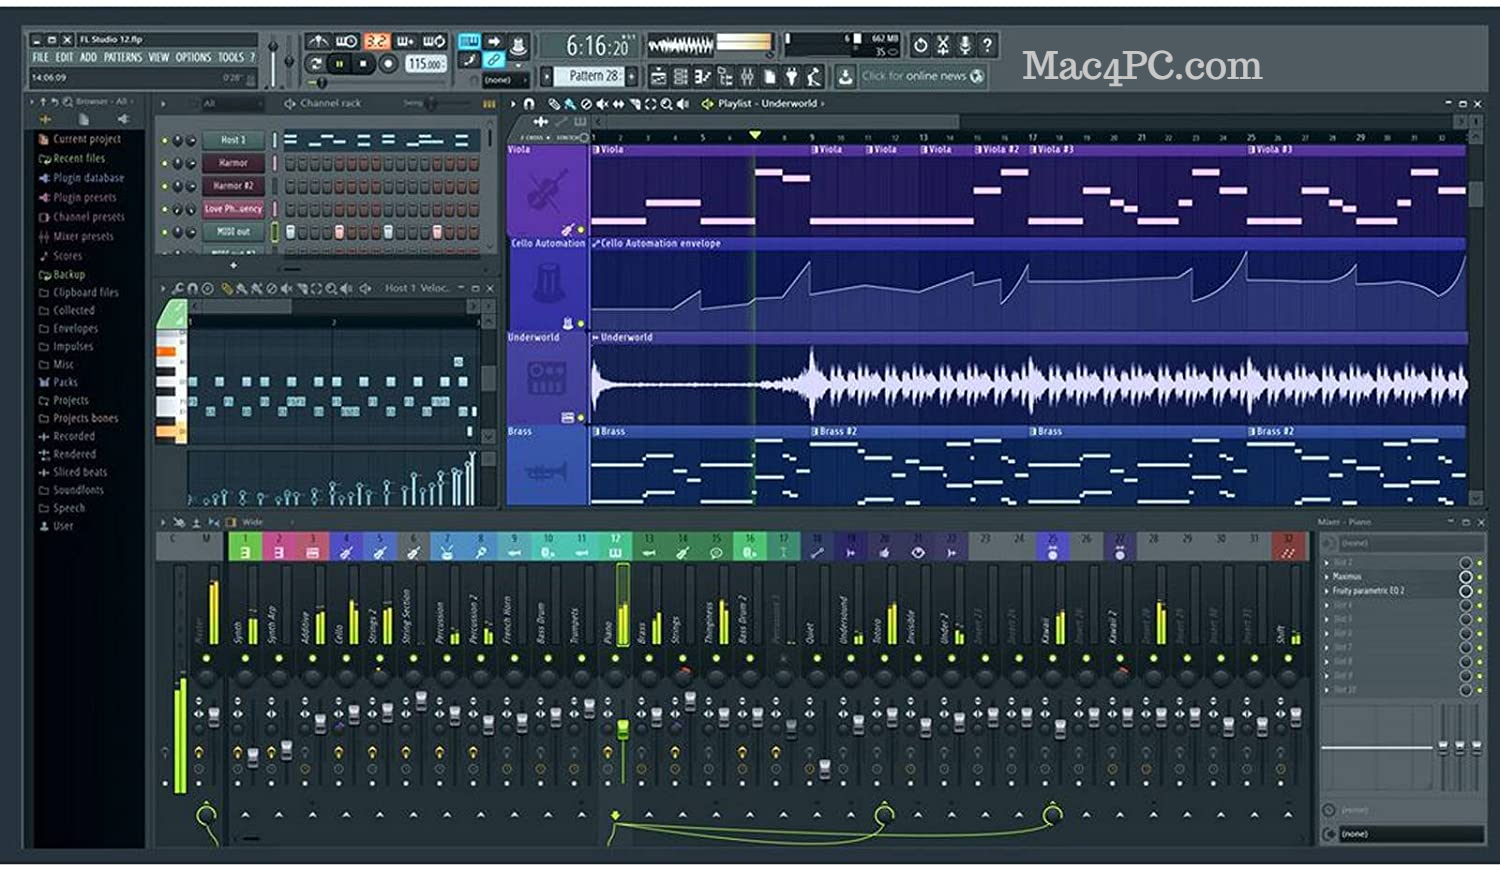 FL Studio 21.0.2 Build 3399 Cracked For macOS With Serial Key Free Download ZIP File